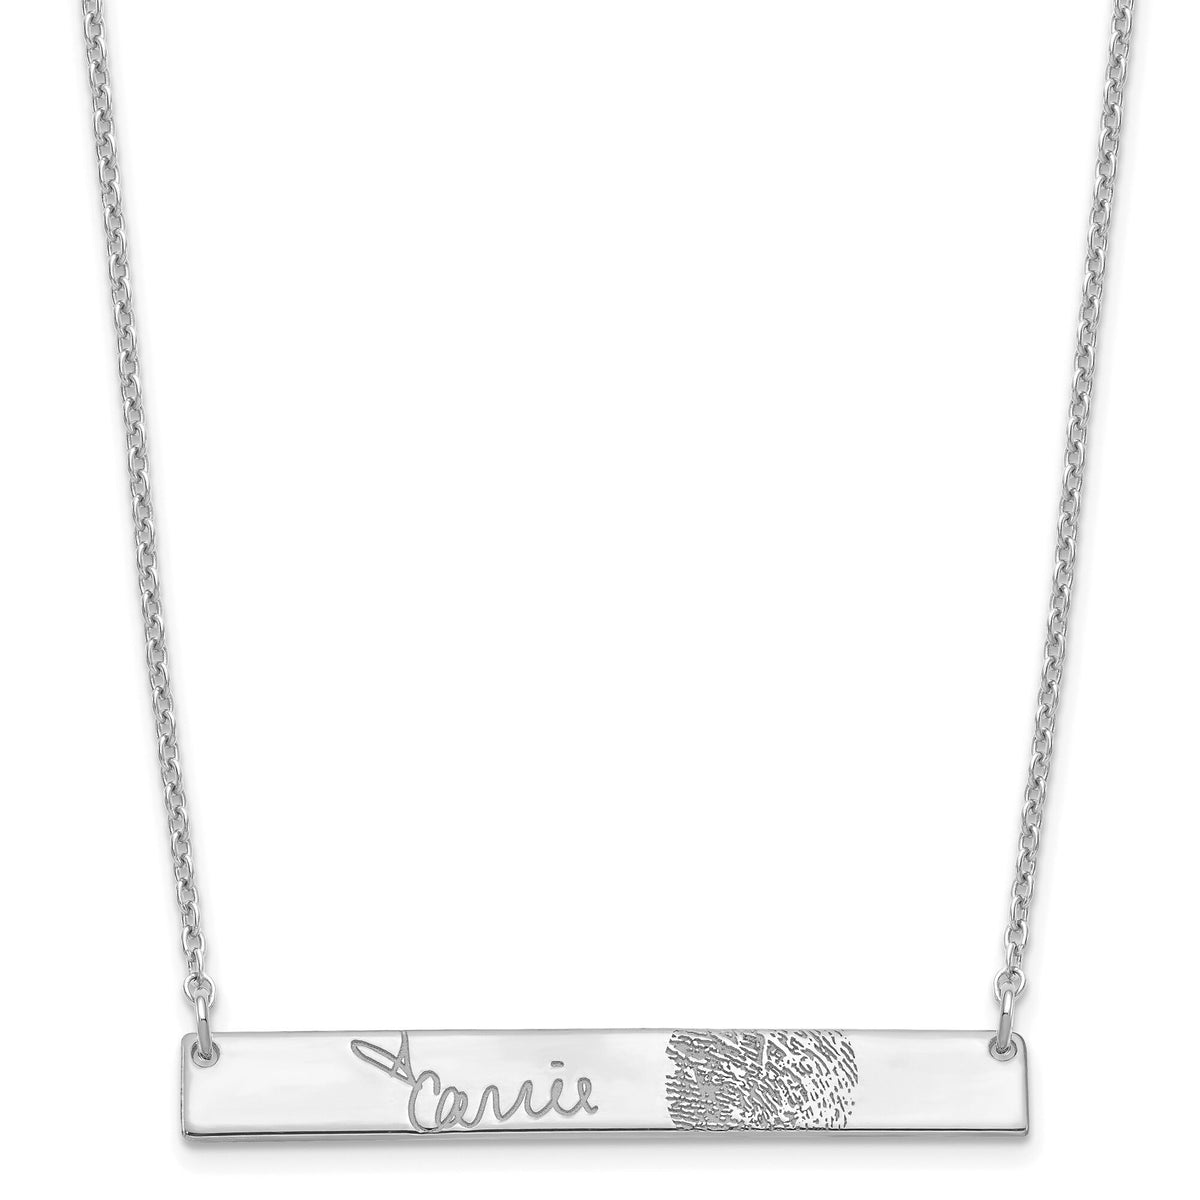 Custom Fingerprint and Signature Nameplate w/ Necklace in Sterling Silver ,Gold Plated Sterling Silver , or 10k Gold -Gift Box Included